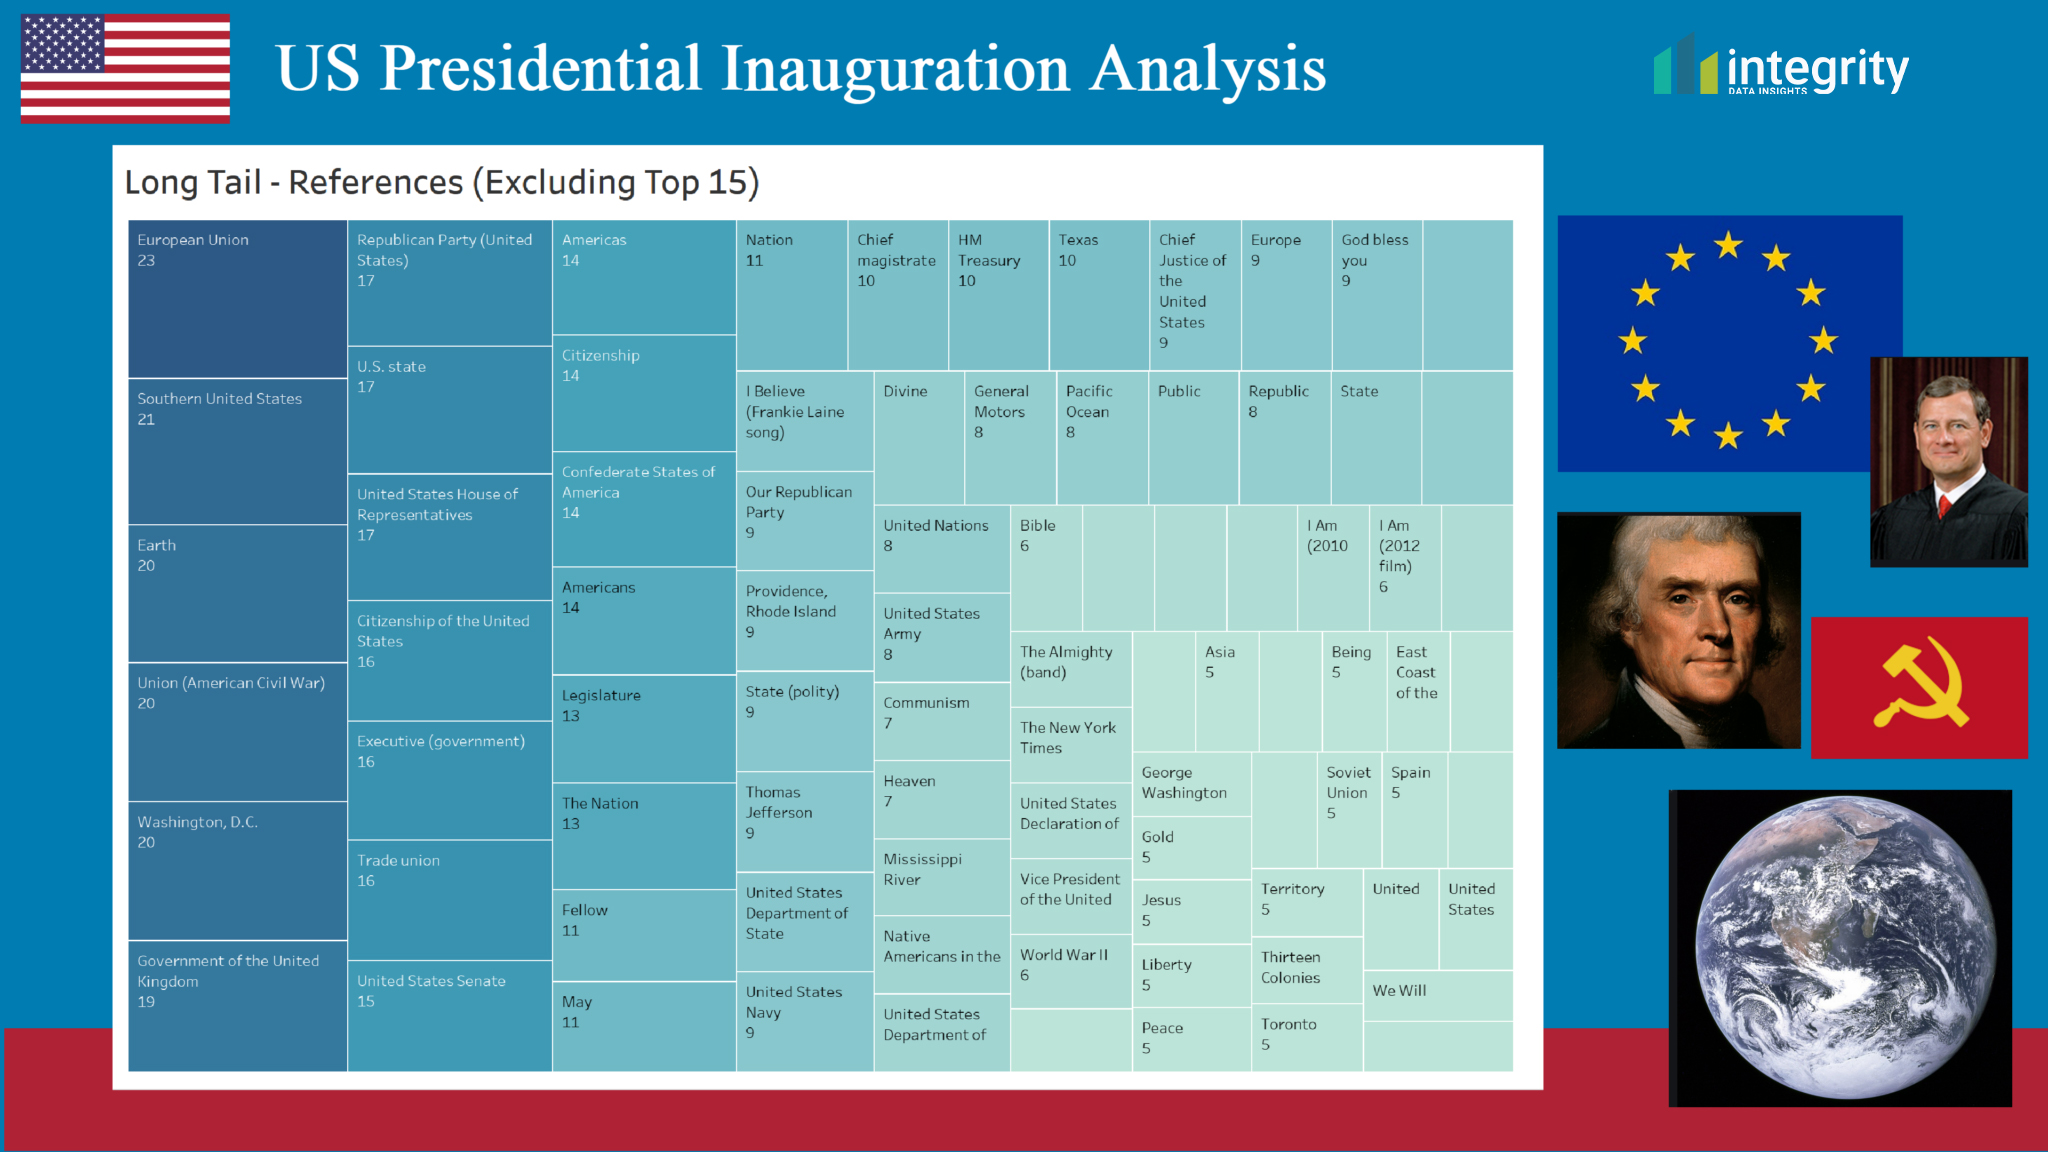 The long tail showing many phrases referenced in presidential inaugural addresses